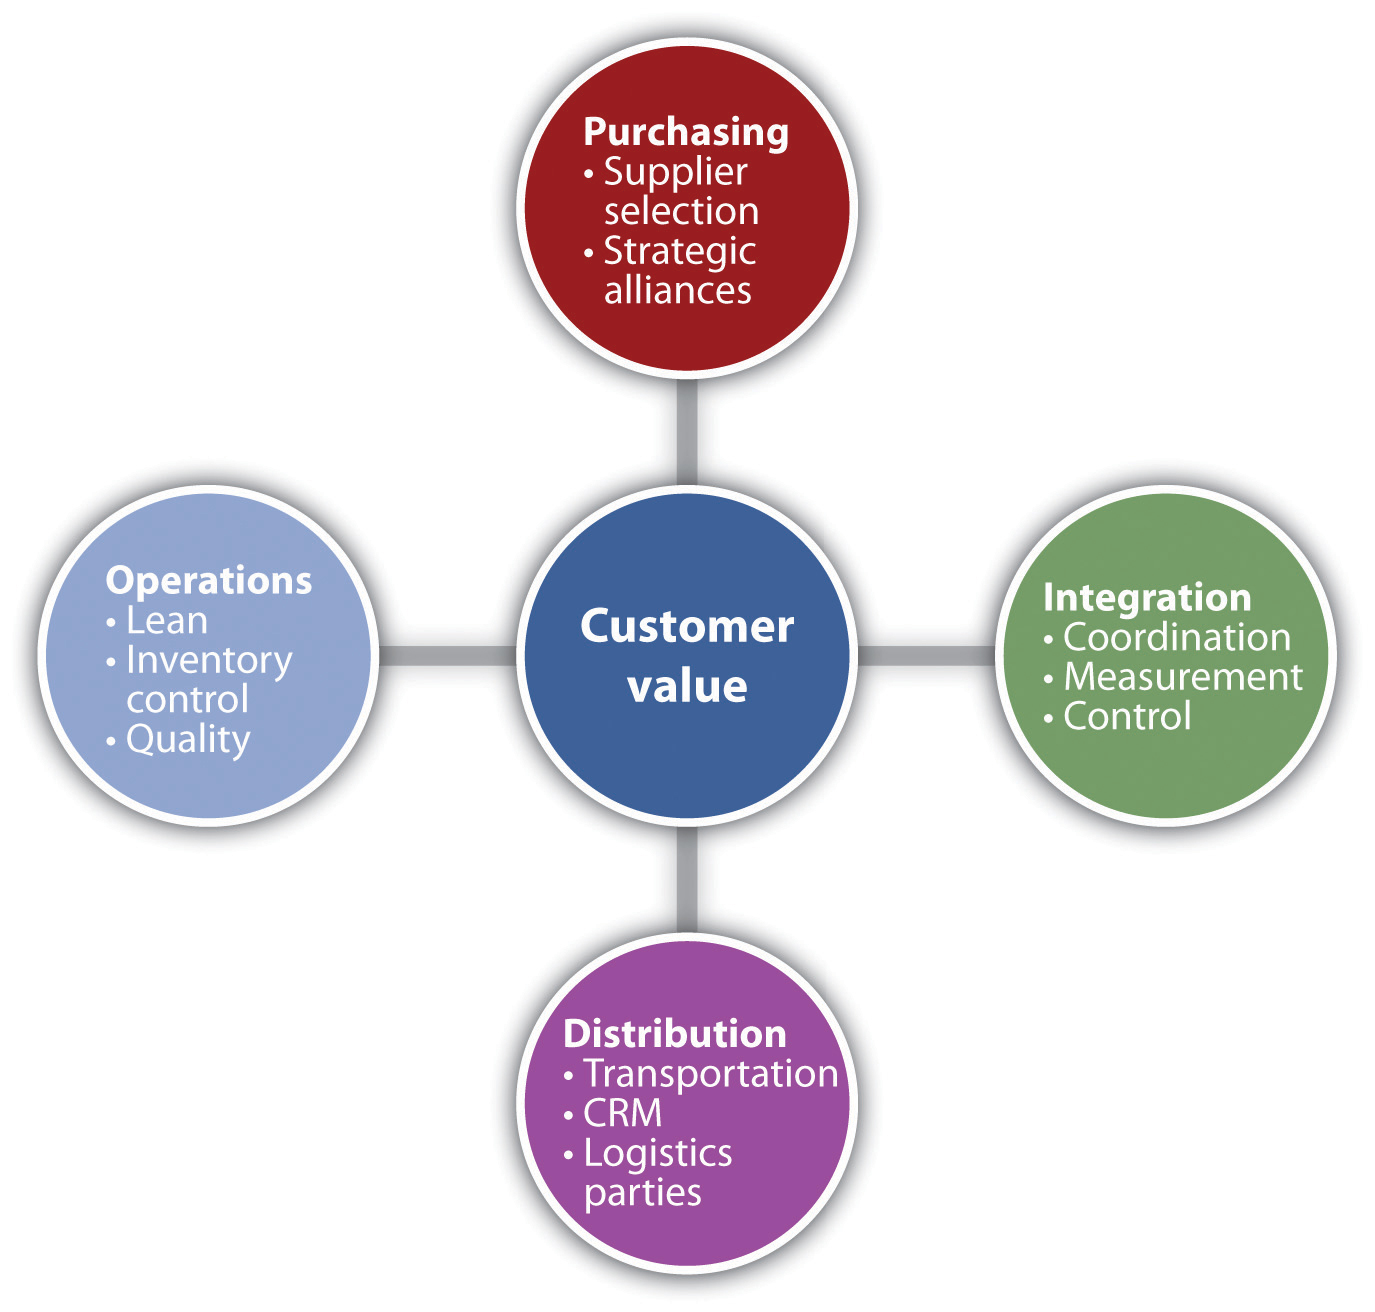 5 keys to supply chain management success